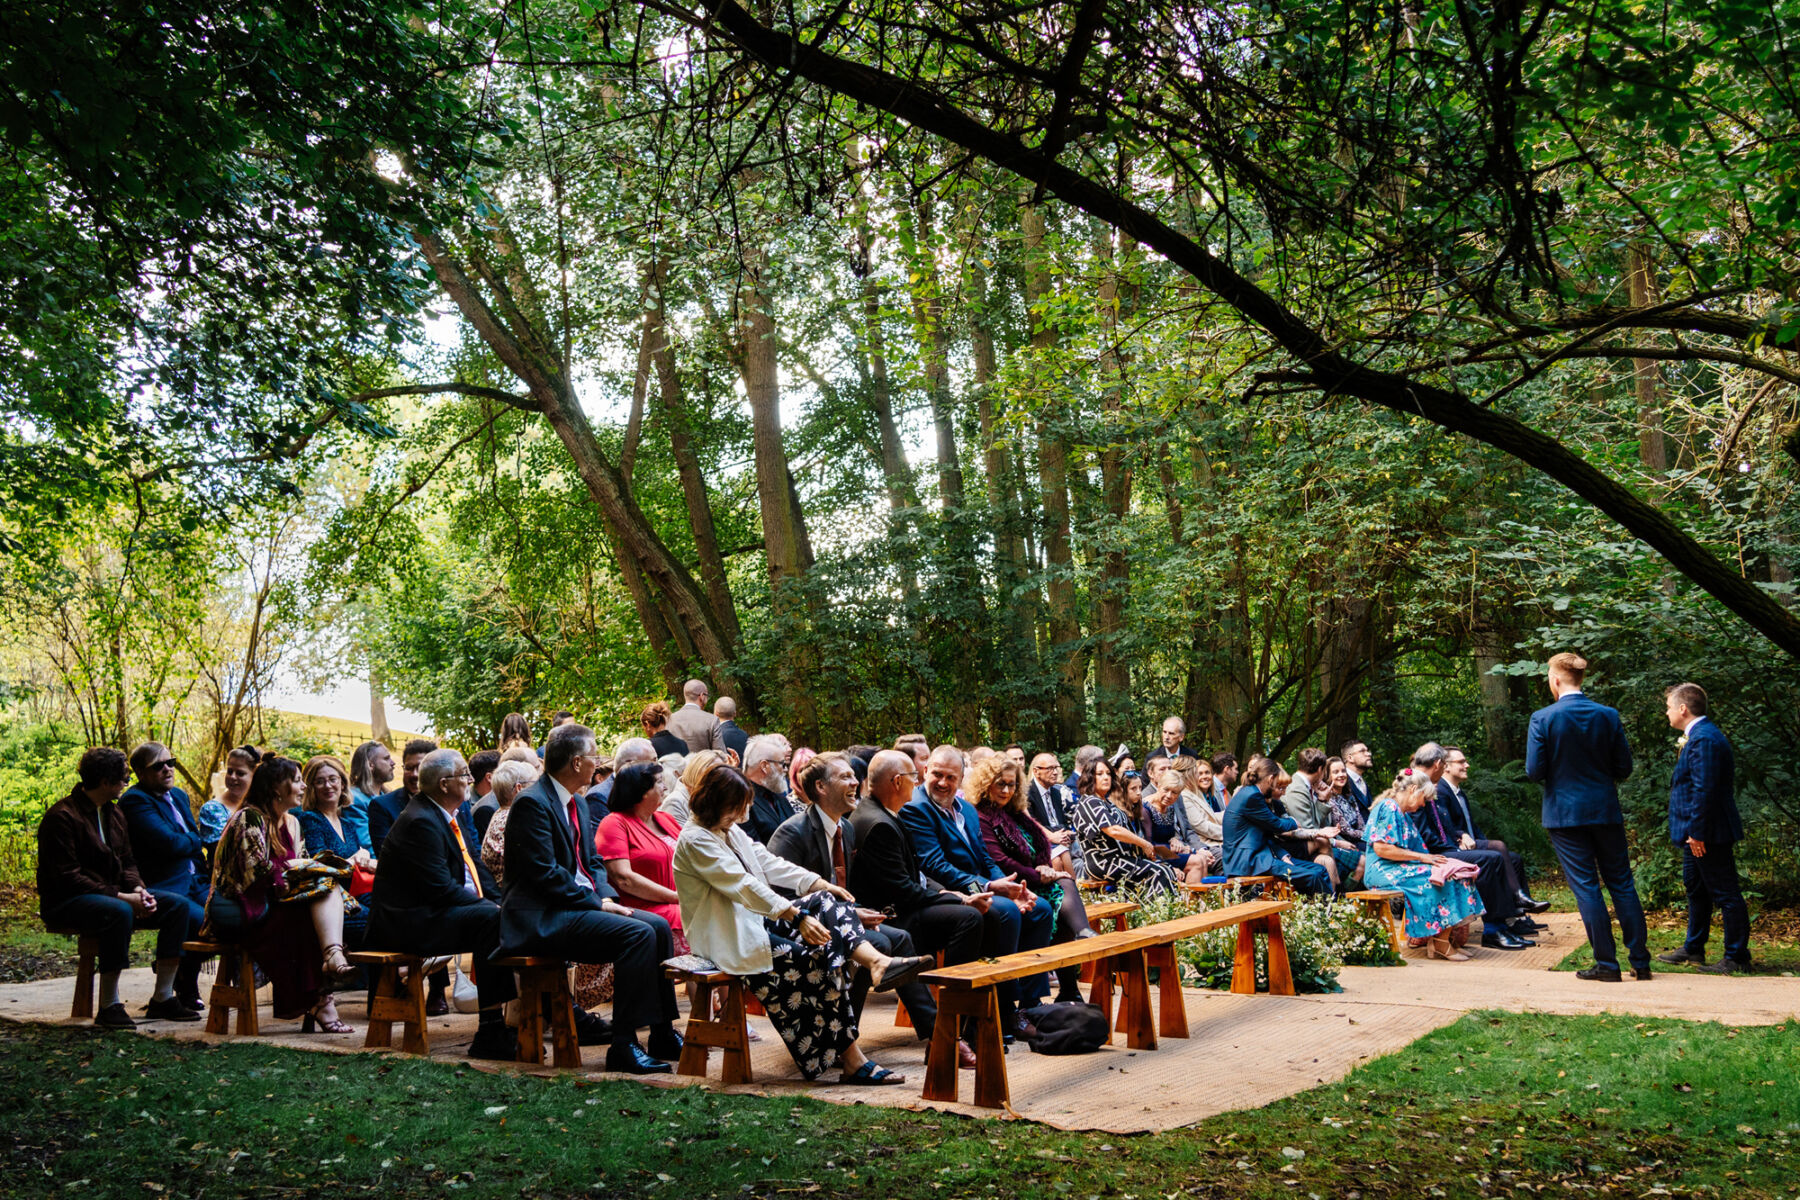 Wedding guests seated on benches for an outdoor woodland ceremony.